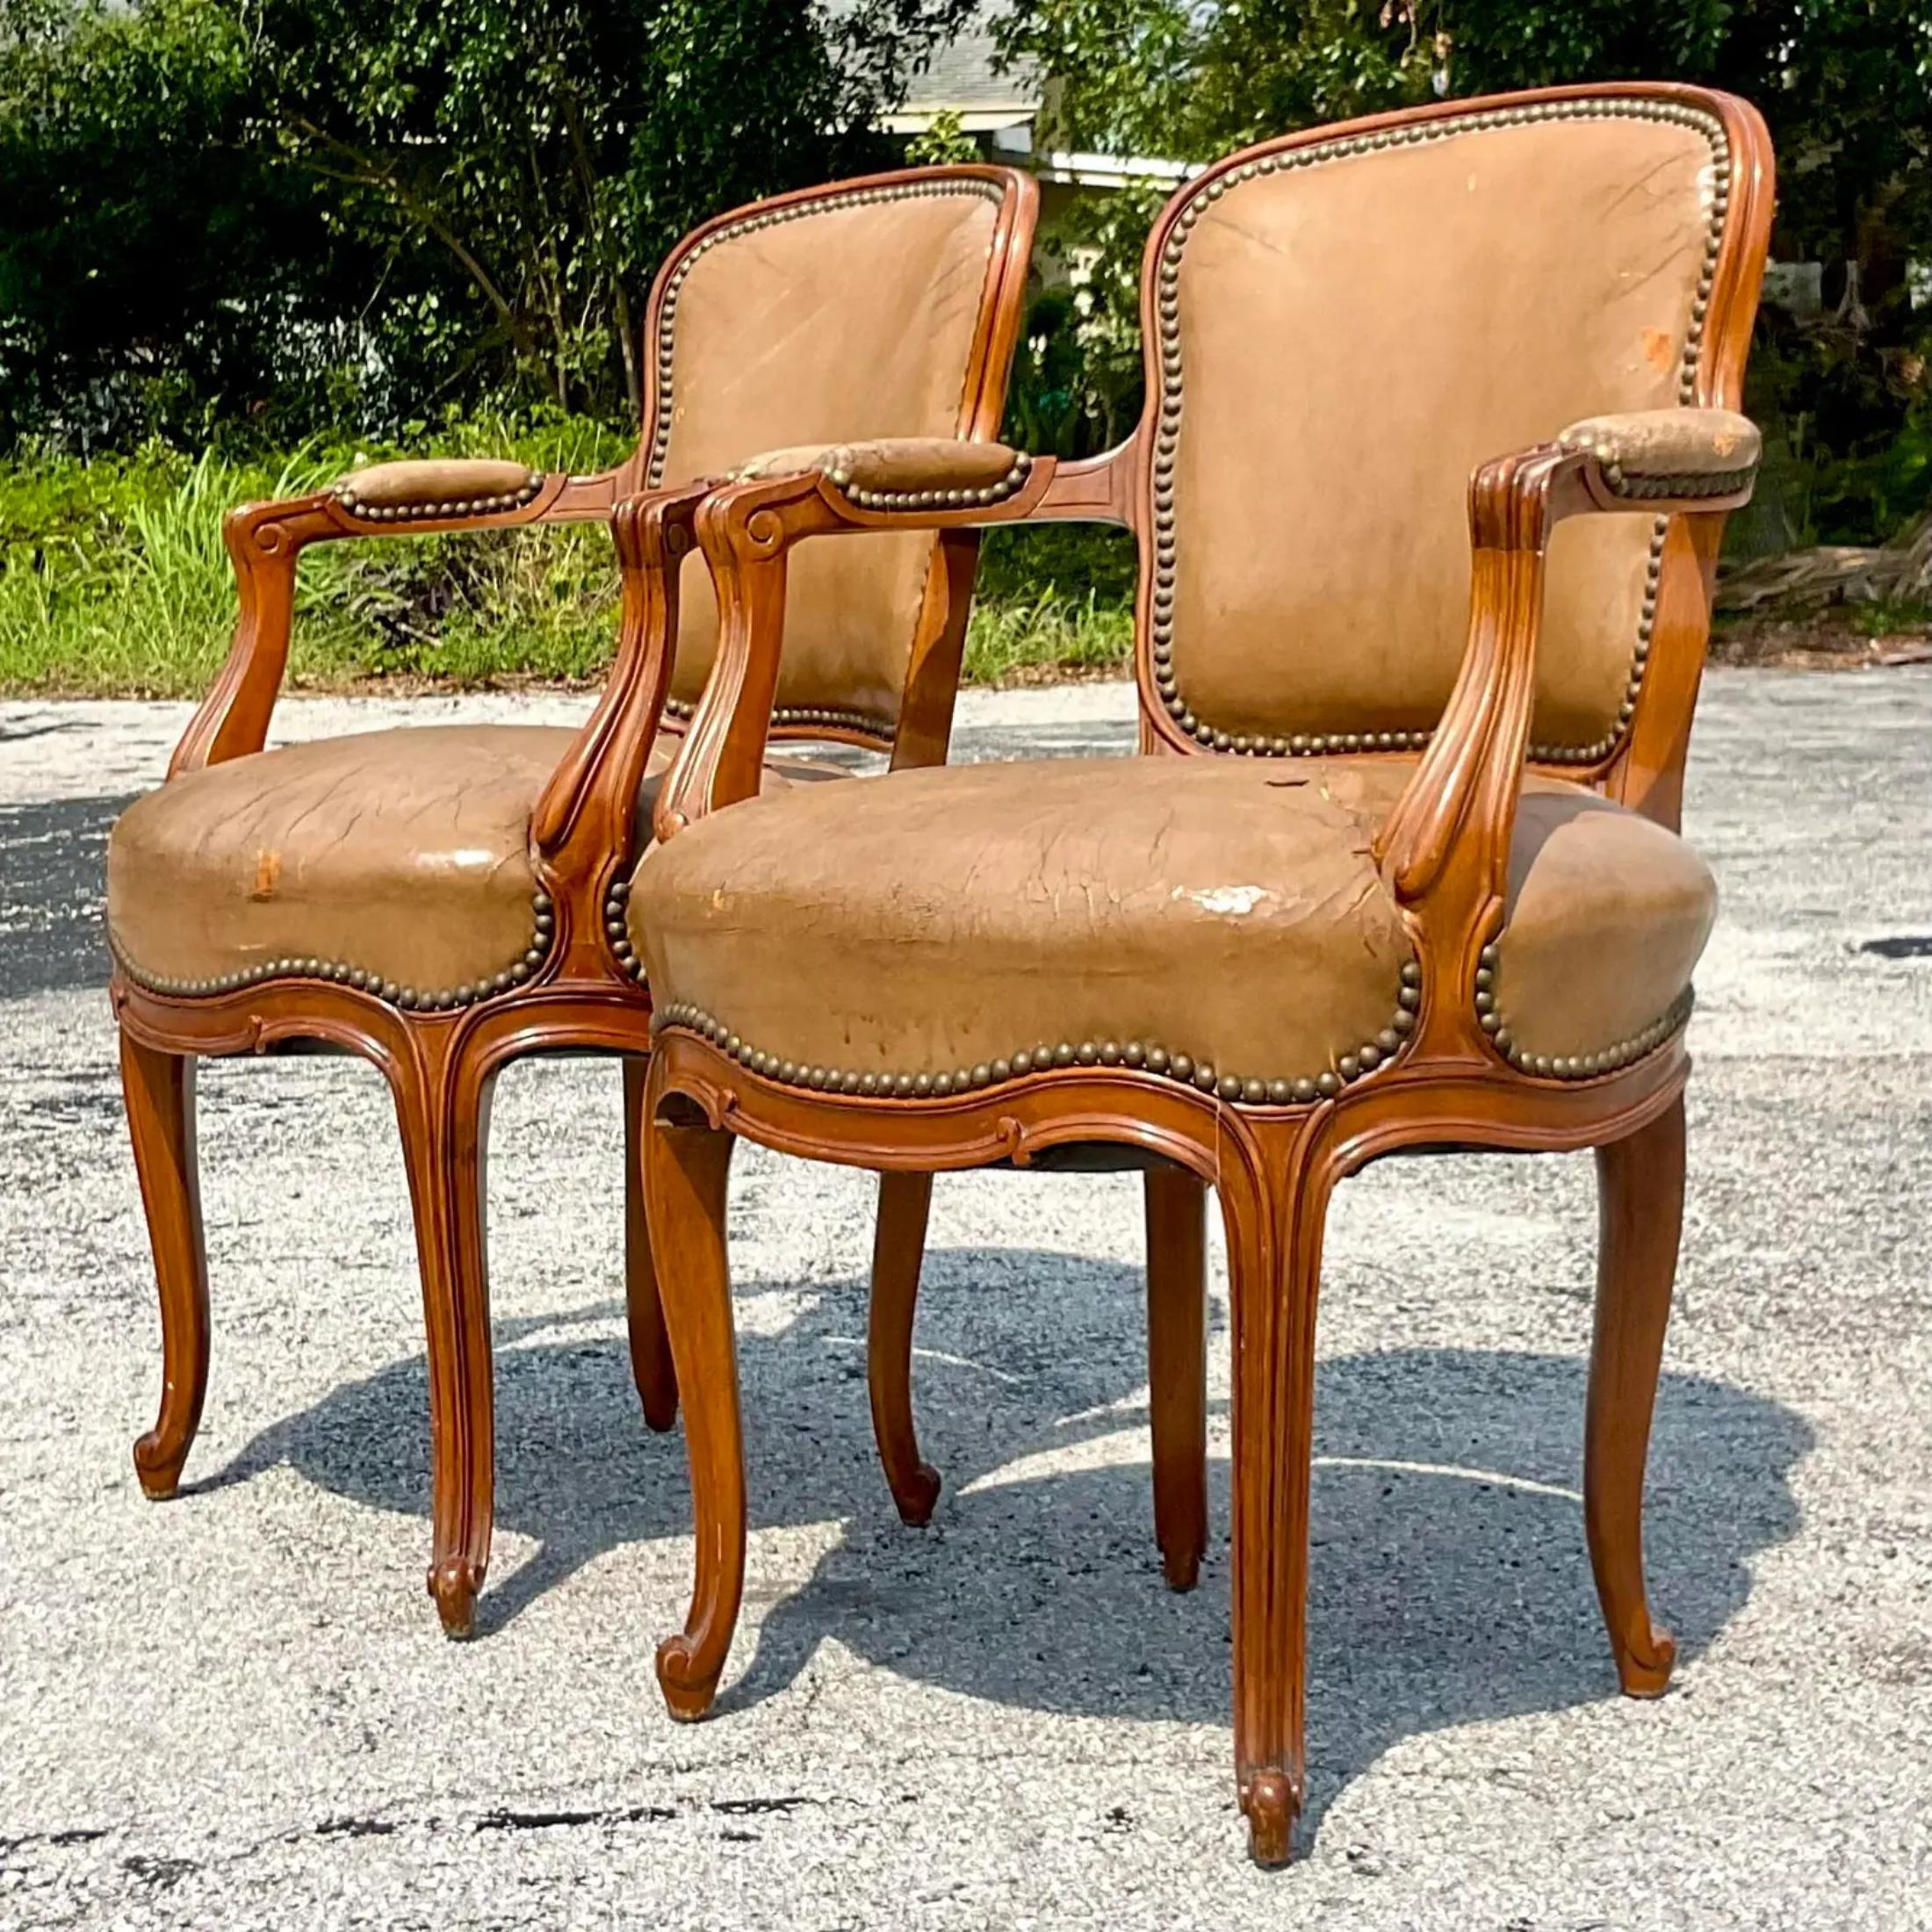 A fantastic pair of vintage leather dining chairs. A great addition to your dining room area. The chairs come with the wear and tear shown in the picture but we think it adds to the charm. Acquired at a Palm Beach estate.